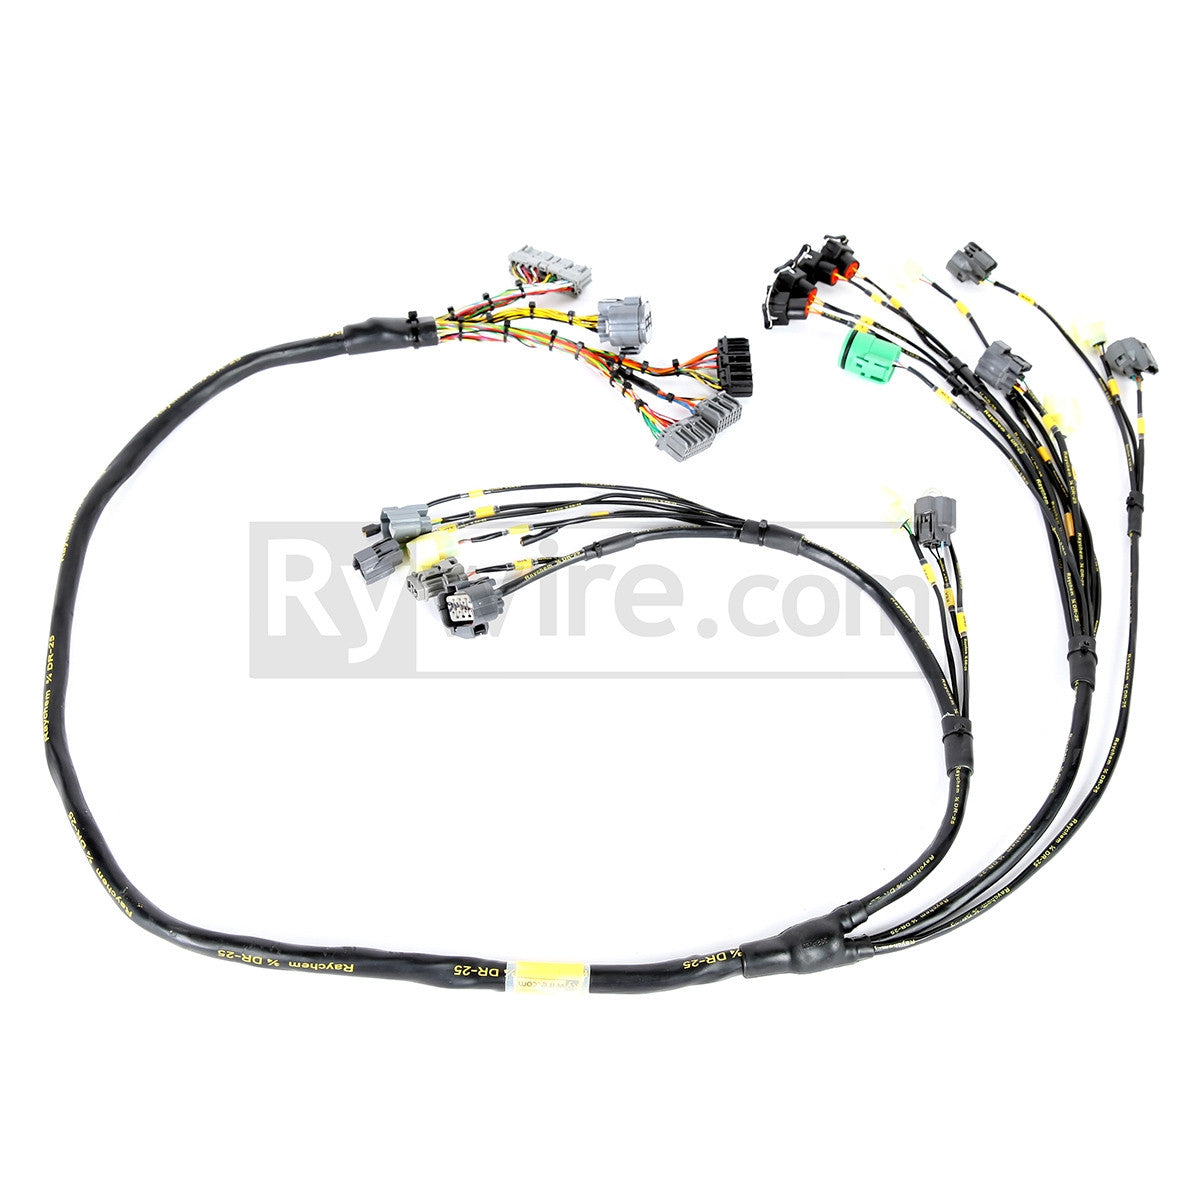 Rywire OBD2 Mil-Spec D/B-Series Tucked Engine Harness (with Quick Disconnect)